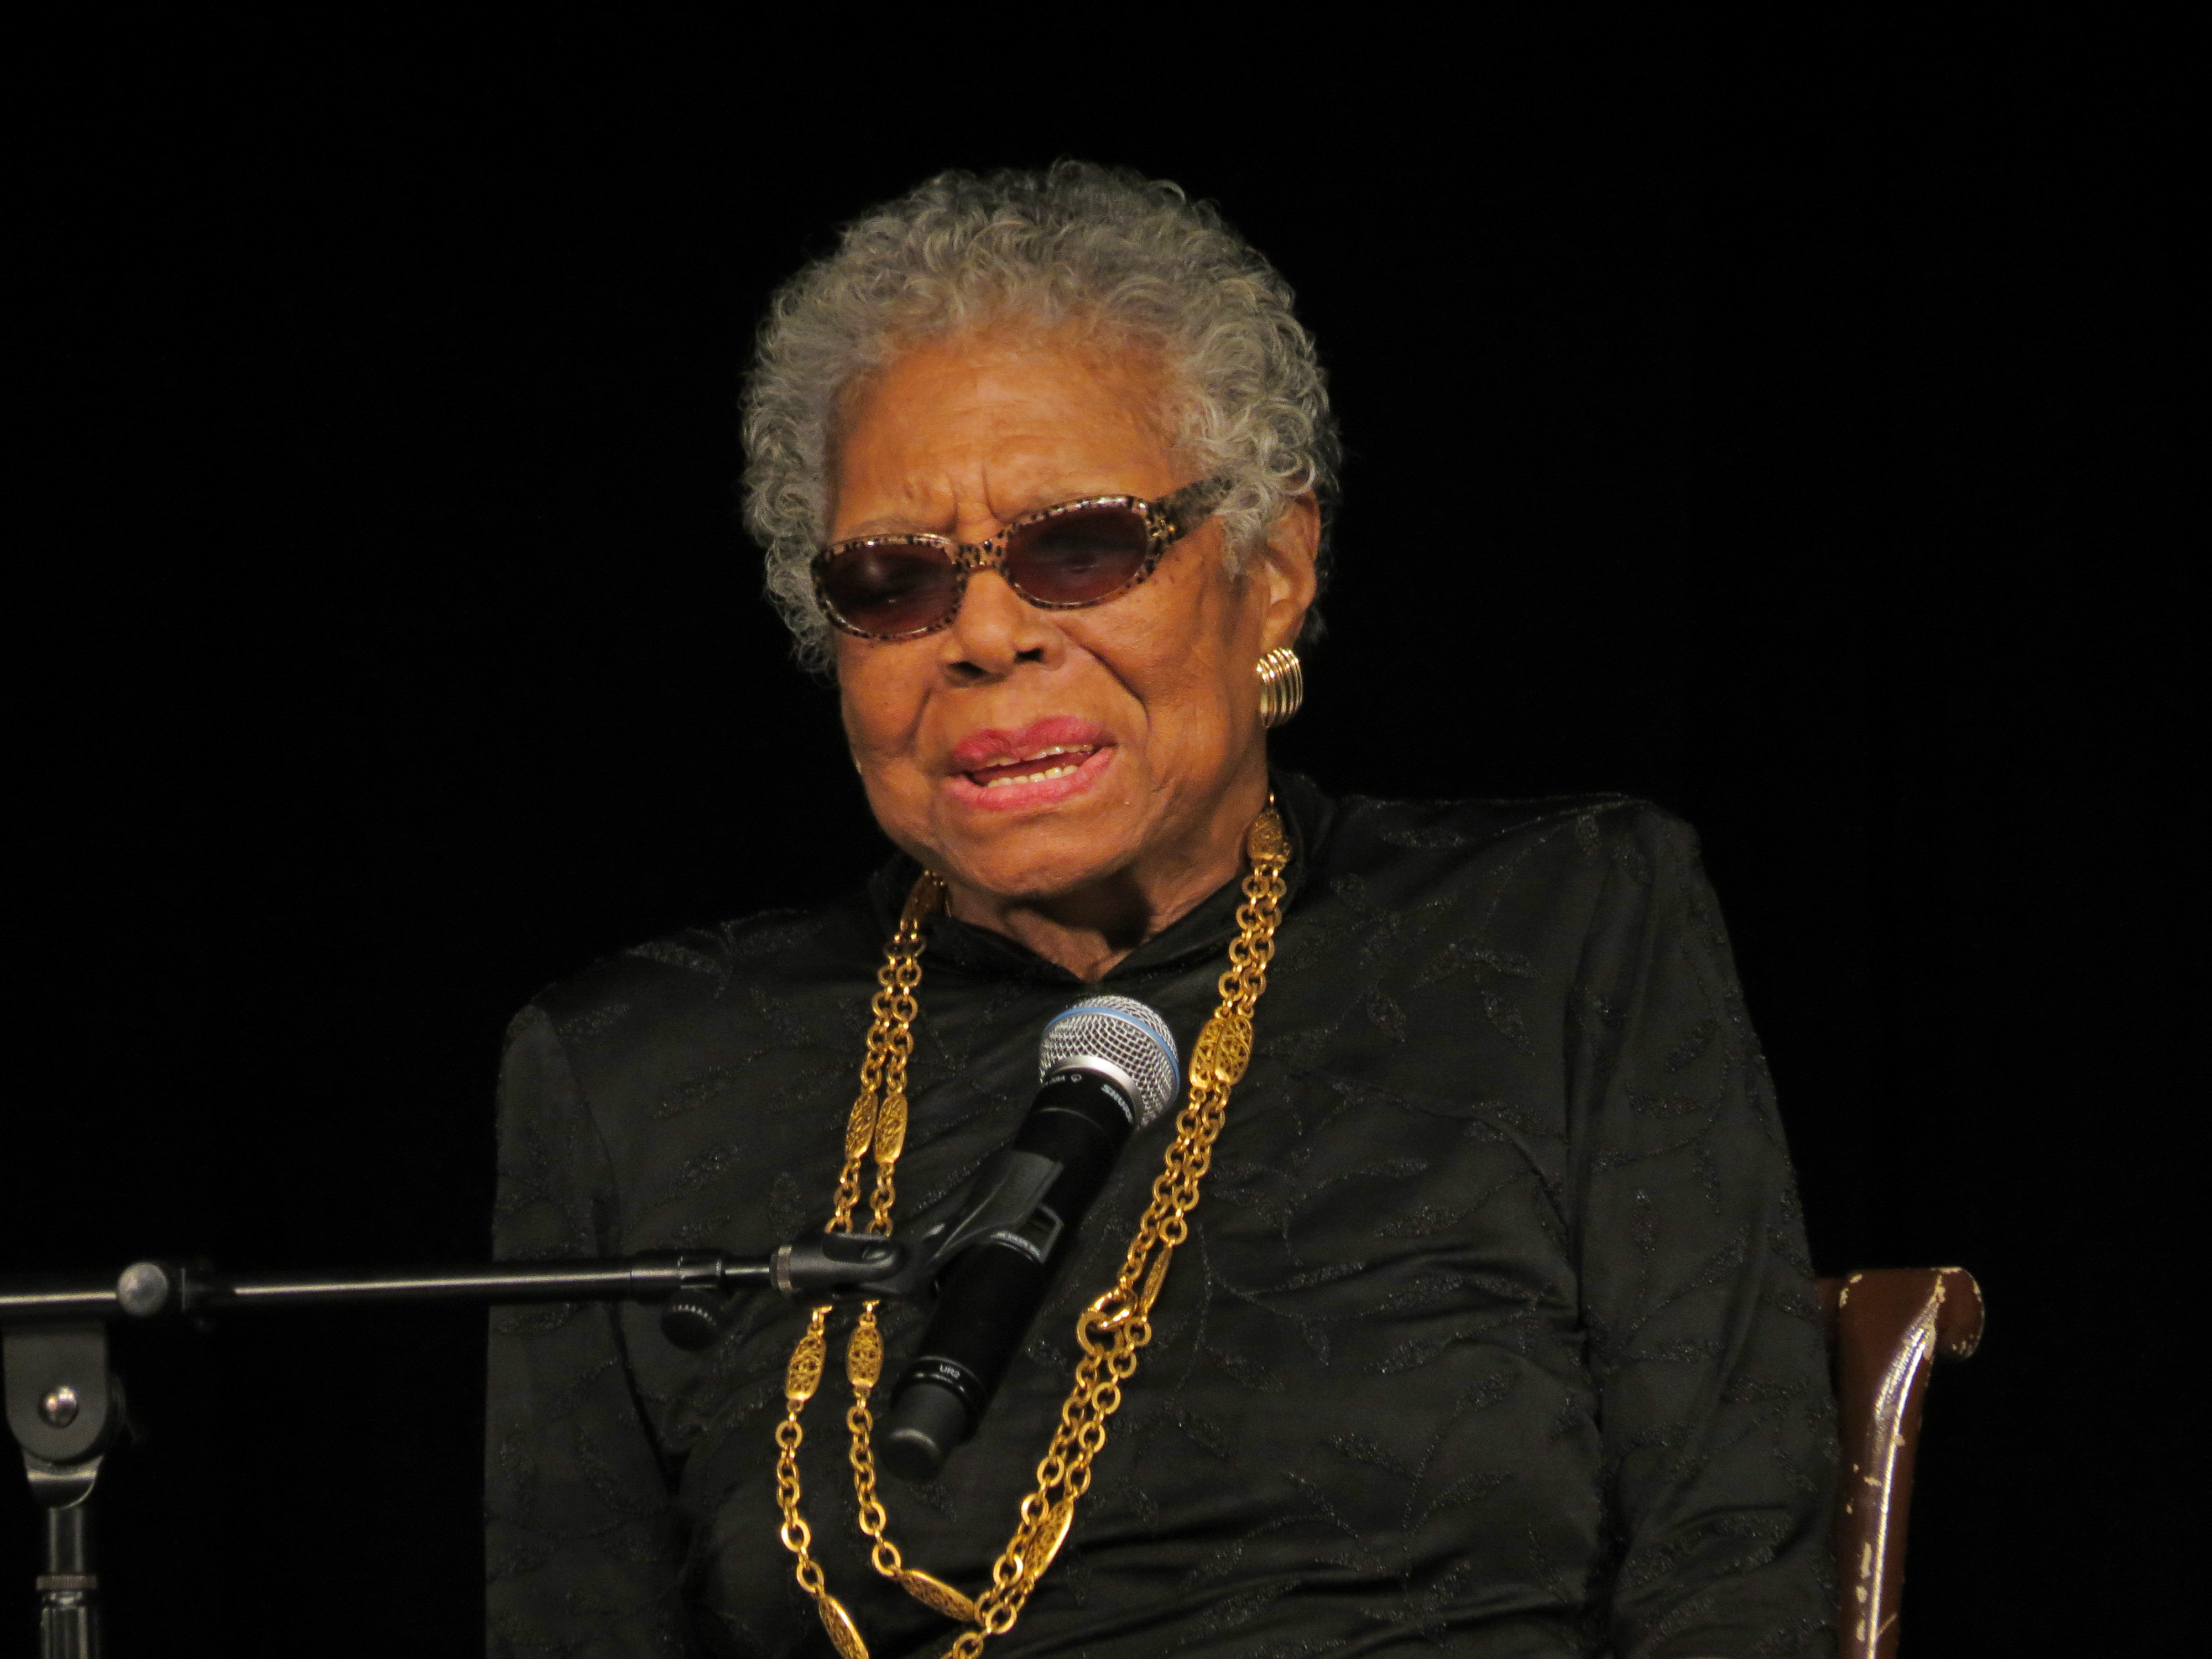 Maya Angelou allo York College ISLGP (2/4/2013). Fonte: Flickr. Licenza CC BY 2.0 DEED.